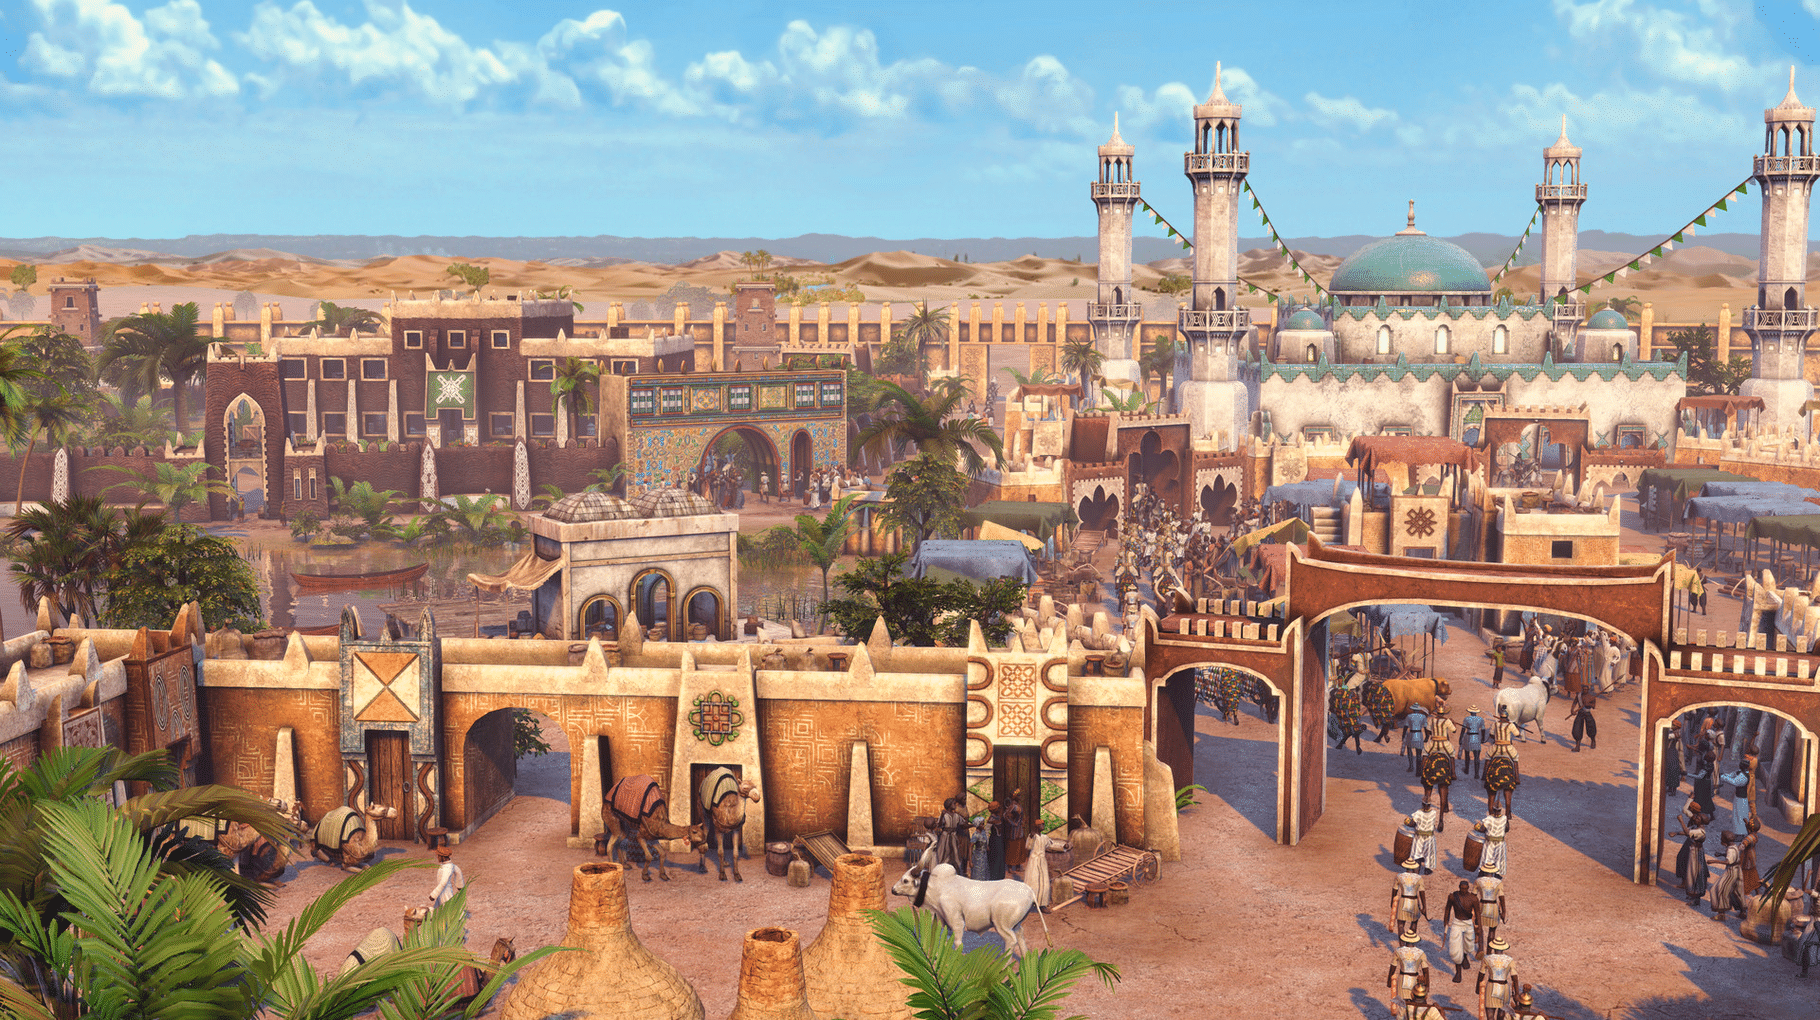 Age of Empires III: Definitive Edition - The African Royals screenshot